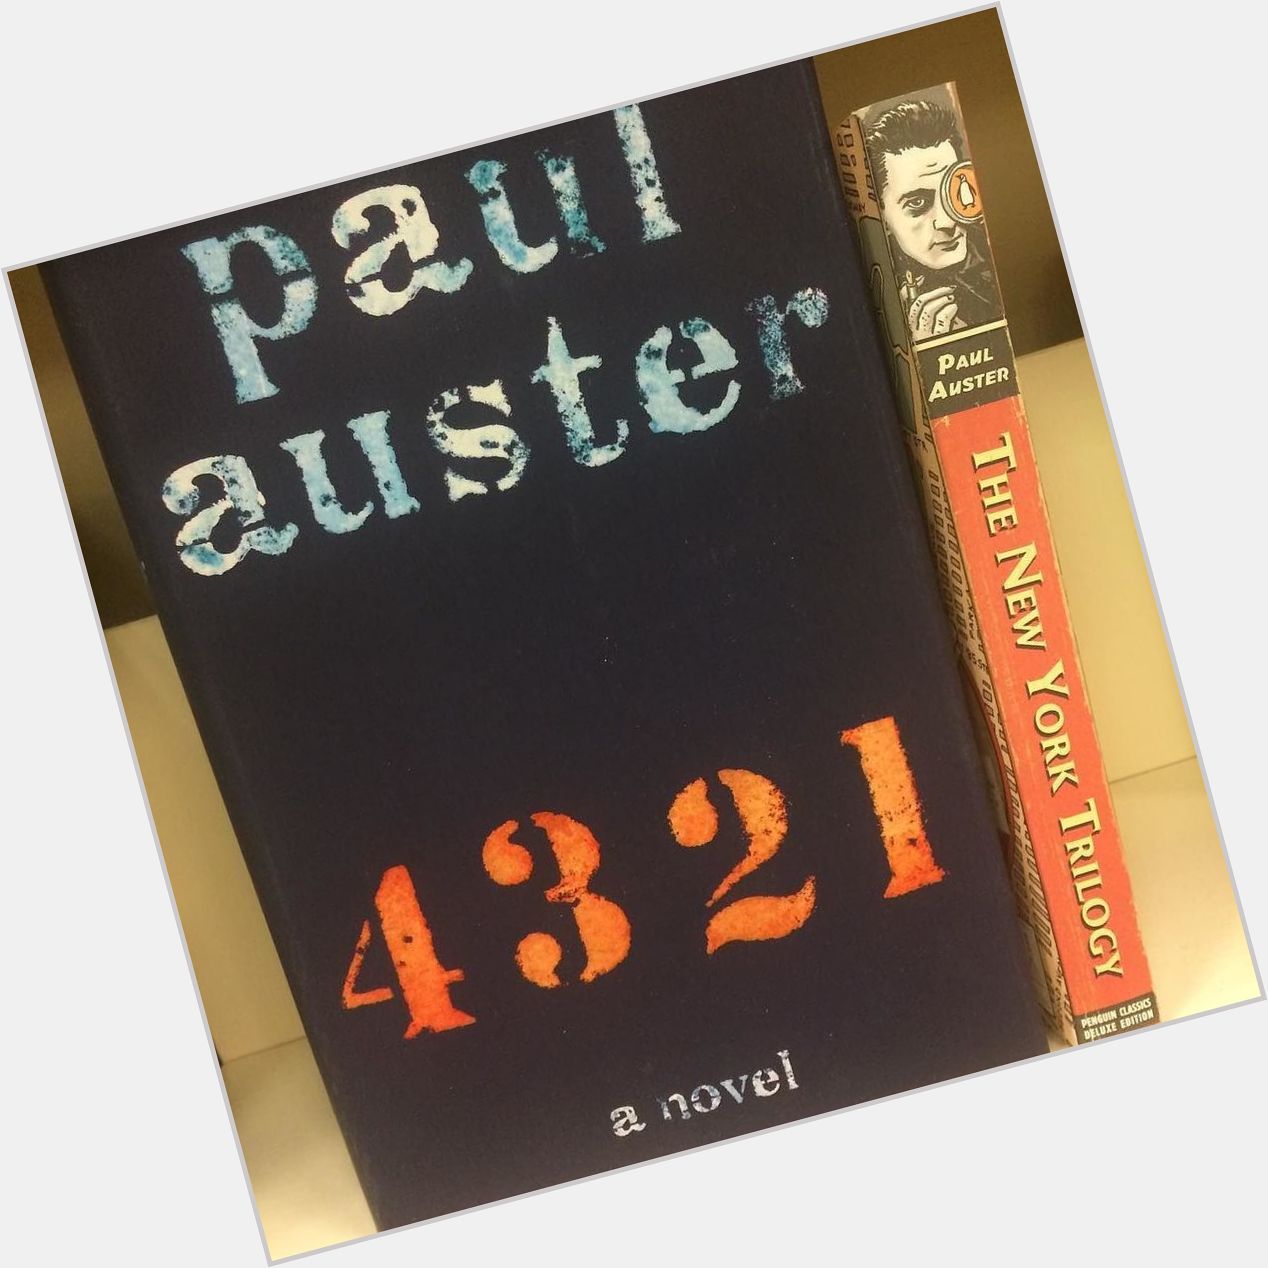 Paul Auster got a great big book published for his birthday! Happy birthday Mr. Auster! I 